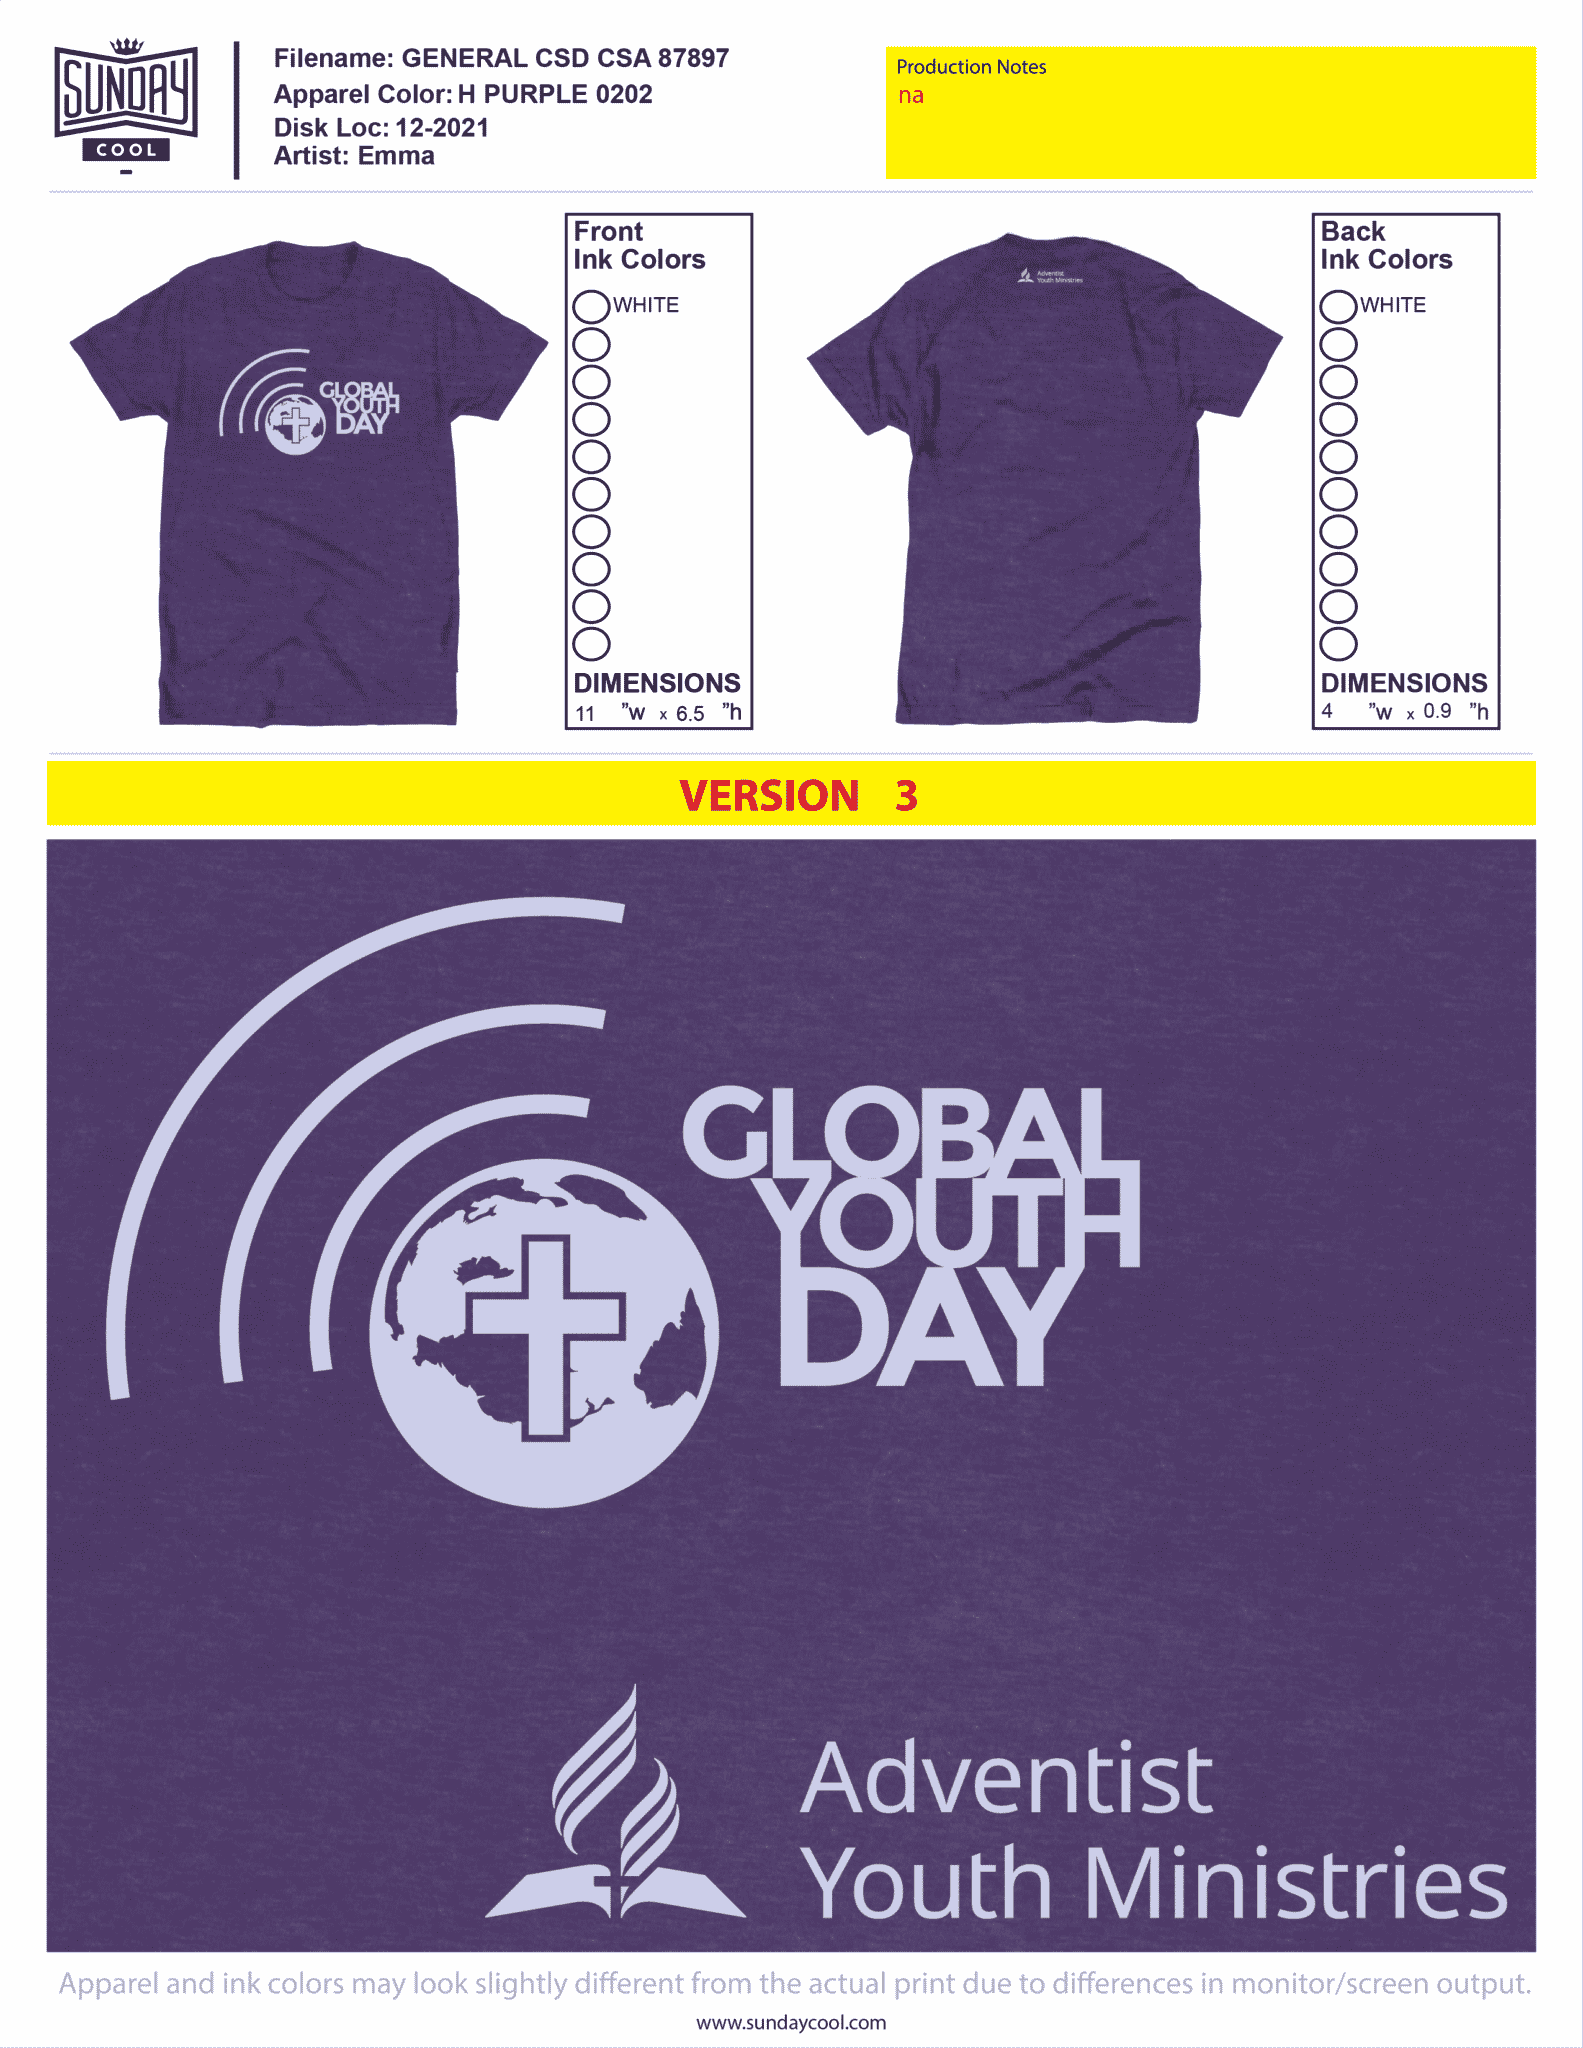 Global Youth Day Adventist Youth Ministries